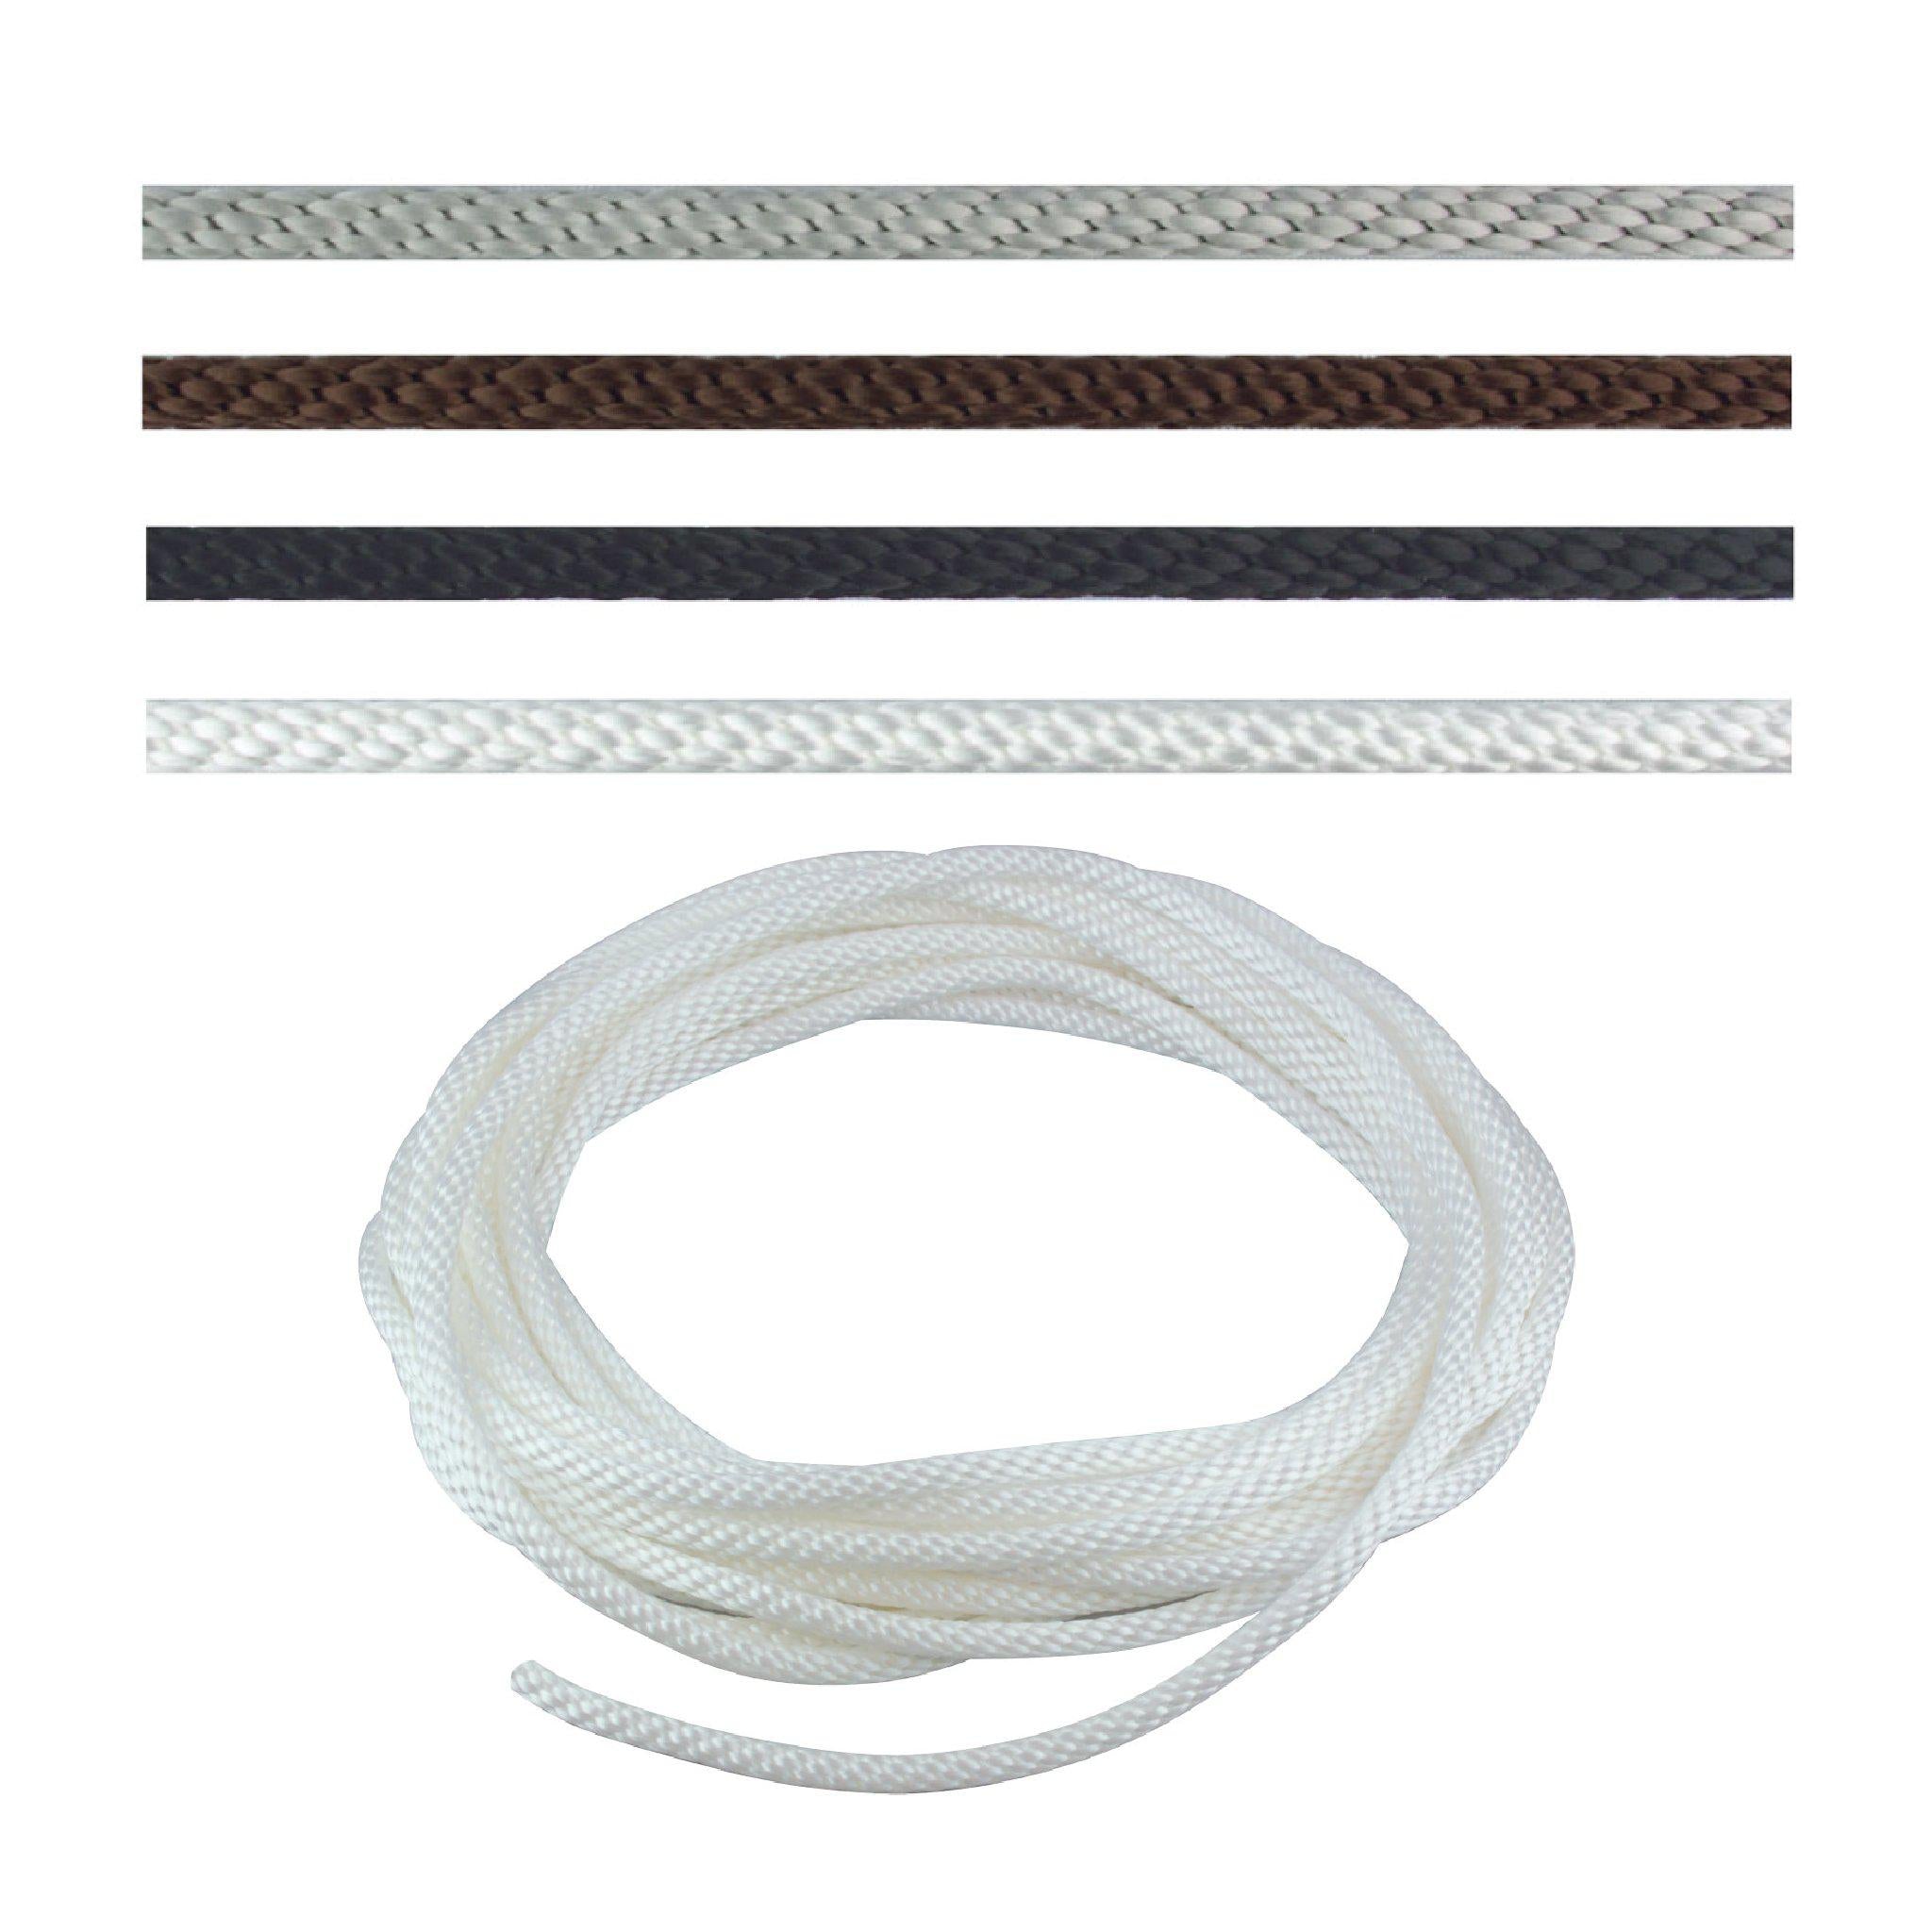 Yardwe 6mm Diameter Flagpole Lifting Rope Flag Halyard Nylon Rope Replacement Rope Wrapping Hanging Tool for Home Outdoor Supplies (White)